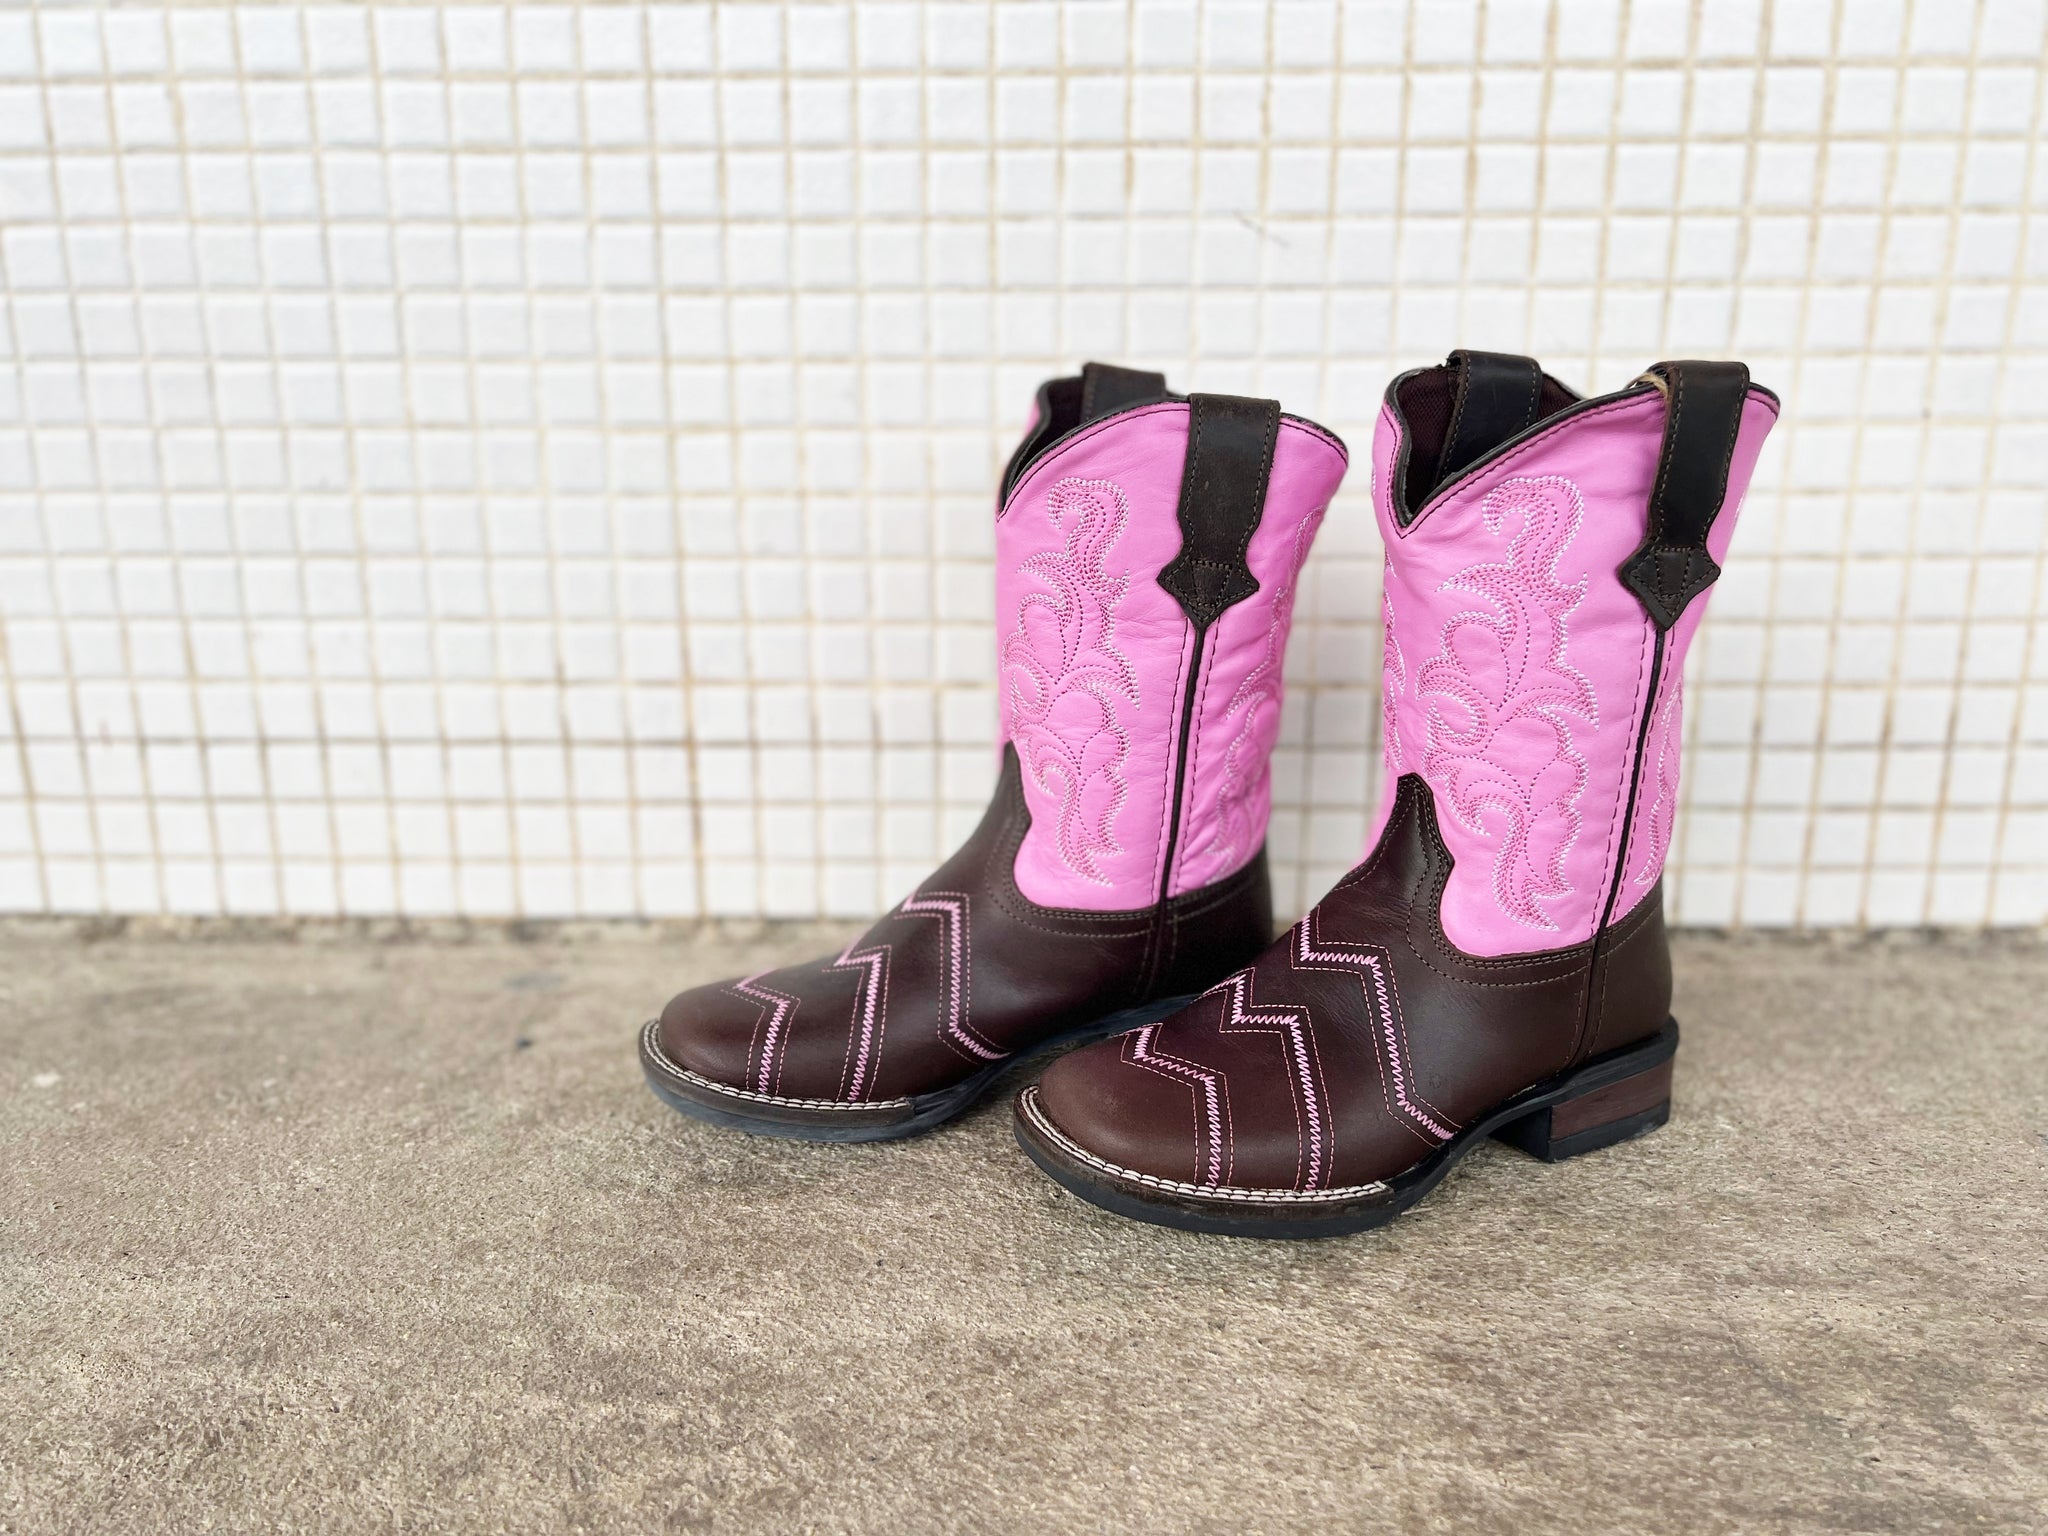 09-119-0912-2937 Roper Big Kids Monterey Angels Boots Chocolate/Pink Leather